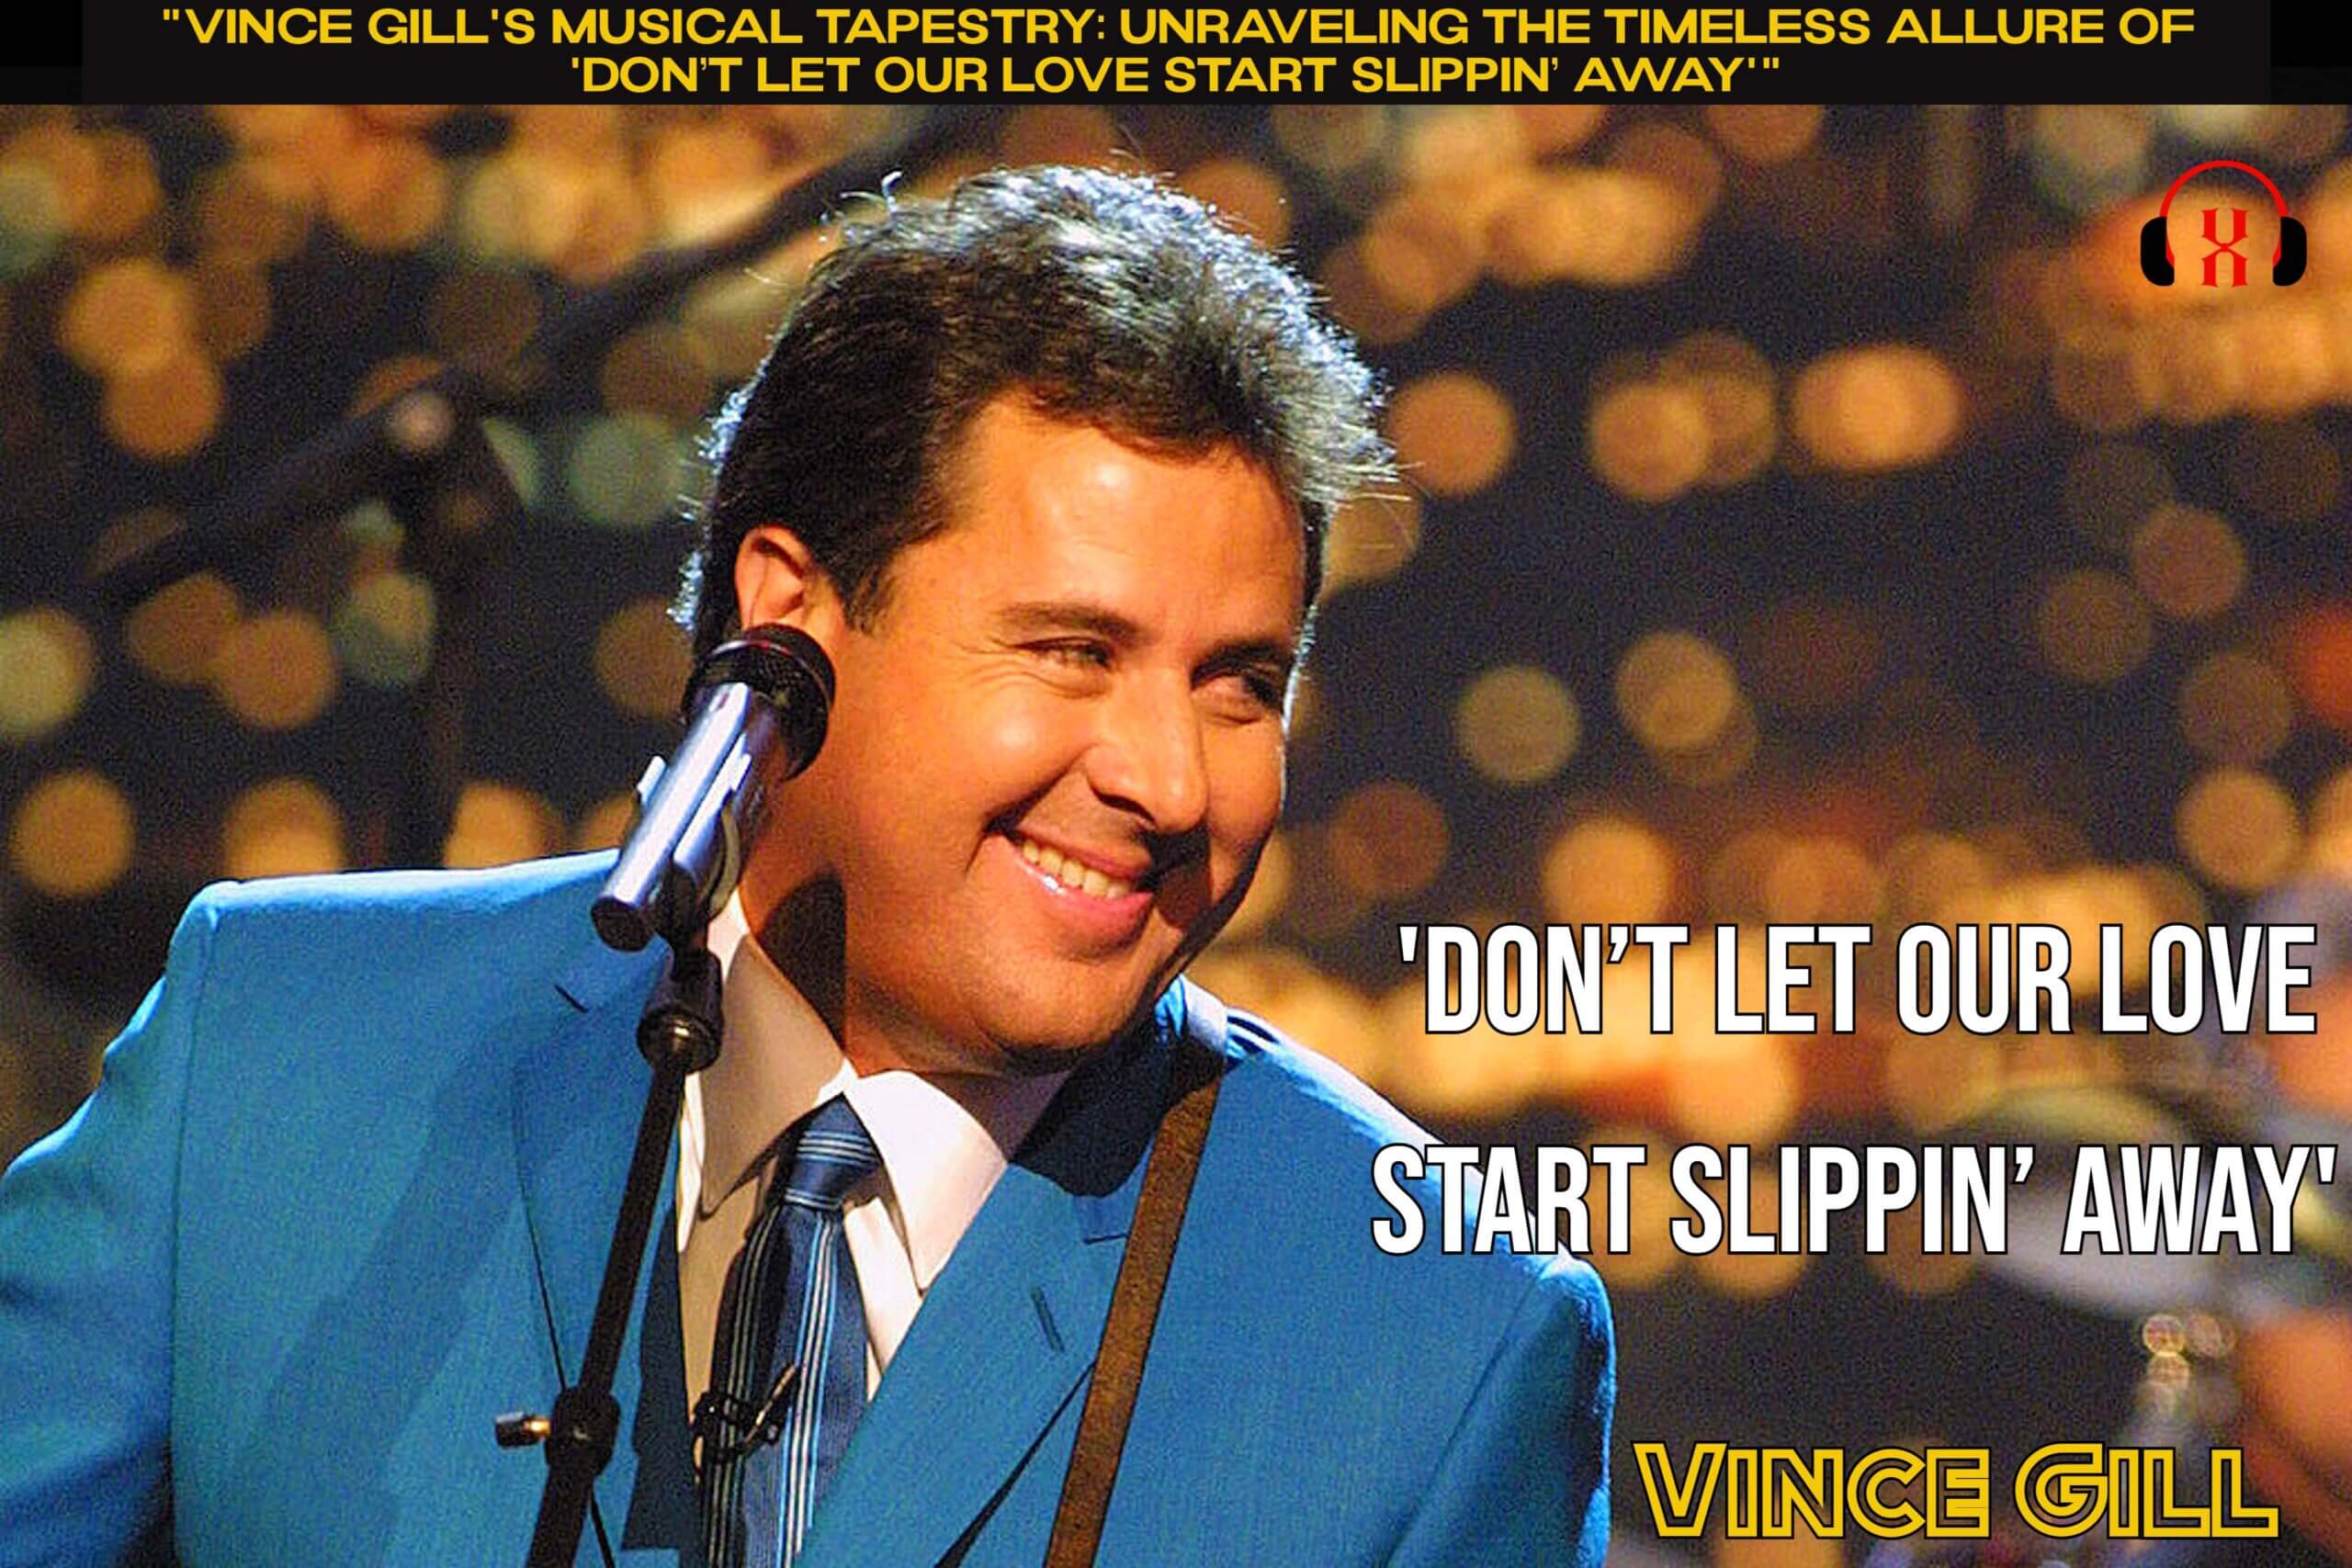 “Vince Gill’s Musical Tapestry: Unraveling the Timeless Allure of ‘Don’t Let Our Love Start Slippin’ Away'”